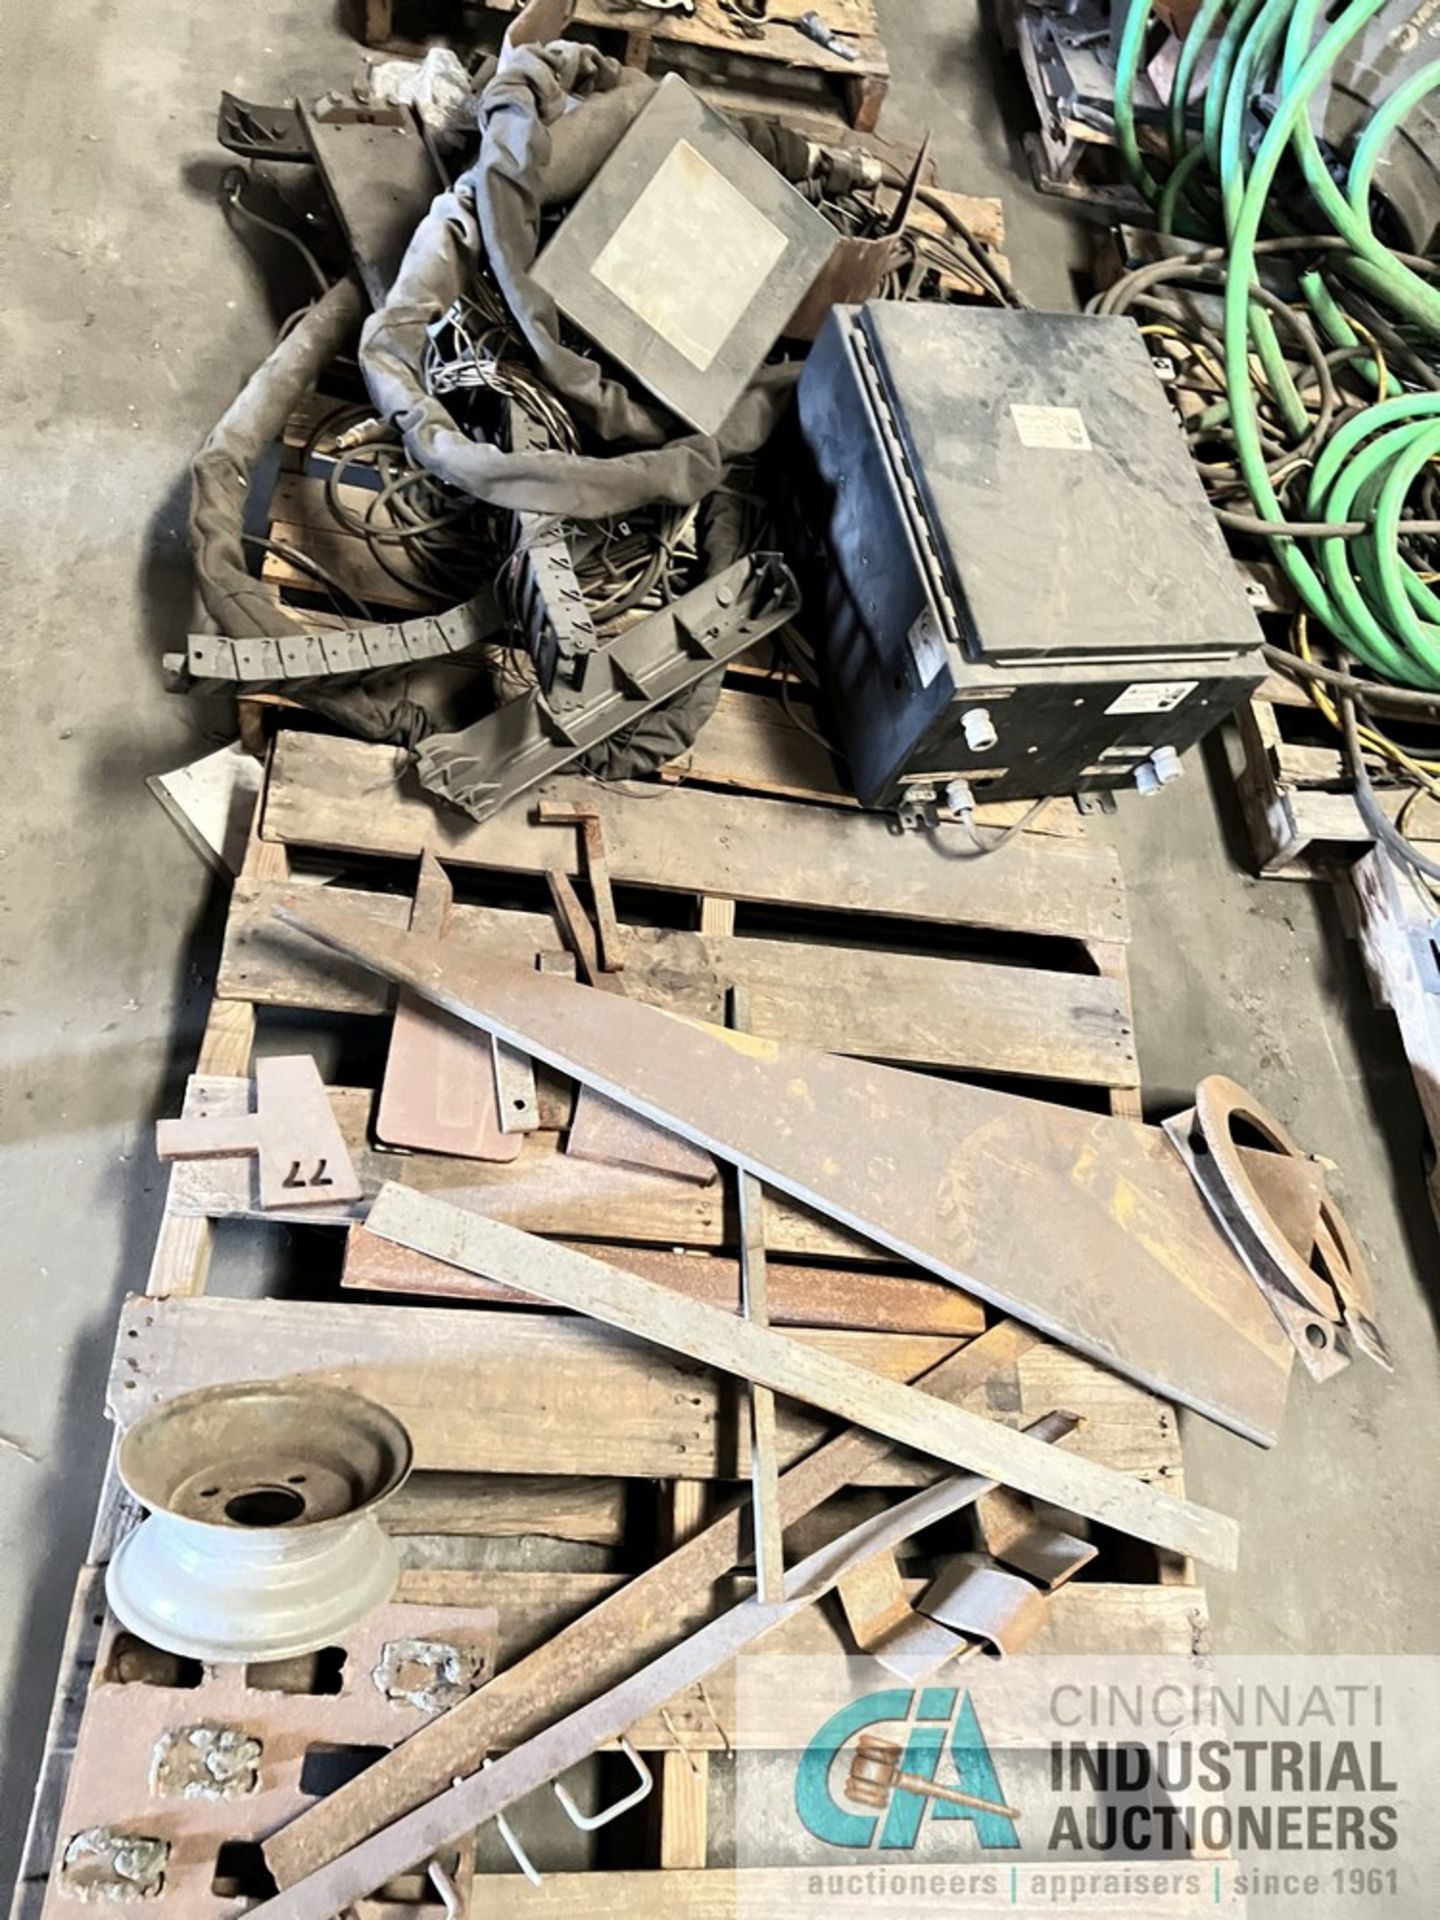 SKIDS MISCELLANEOUS MACHINE PARTS, TOOLING, WIRE, HOSE - Image 4 of 14